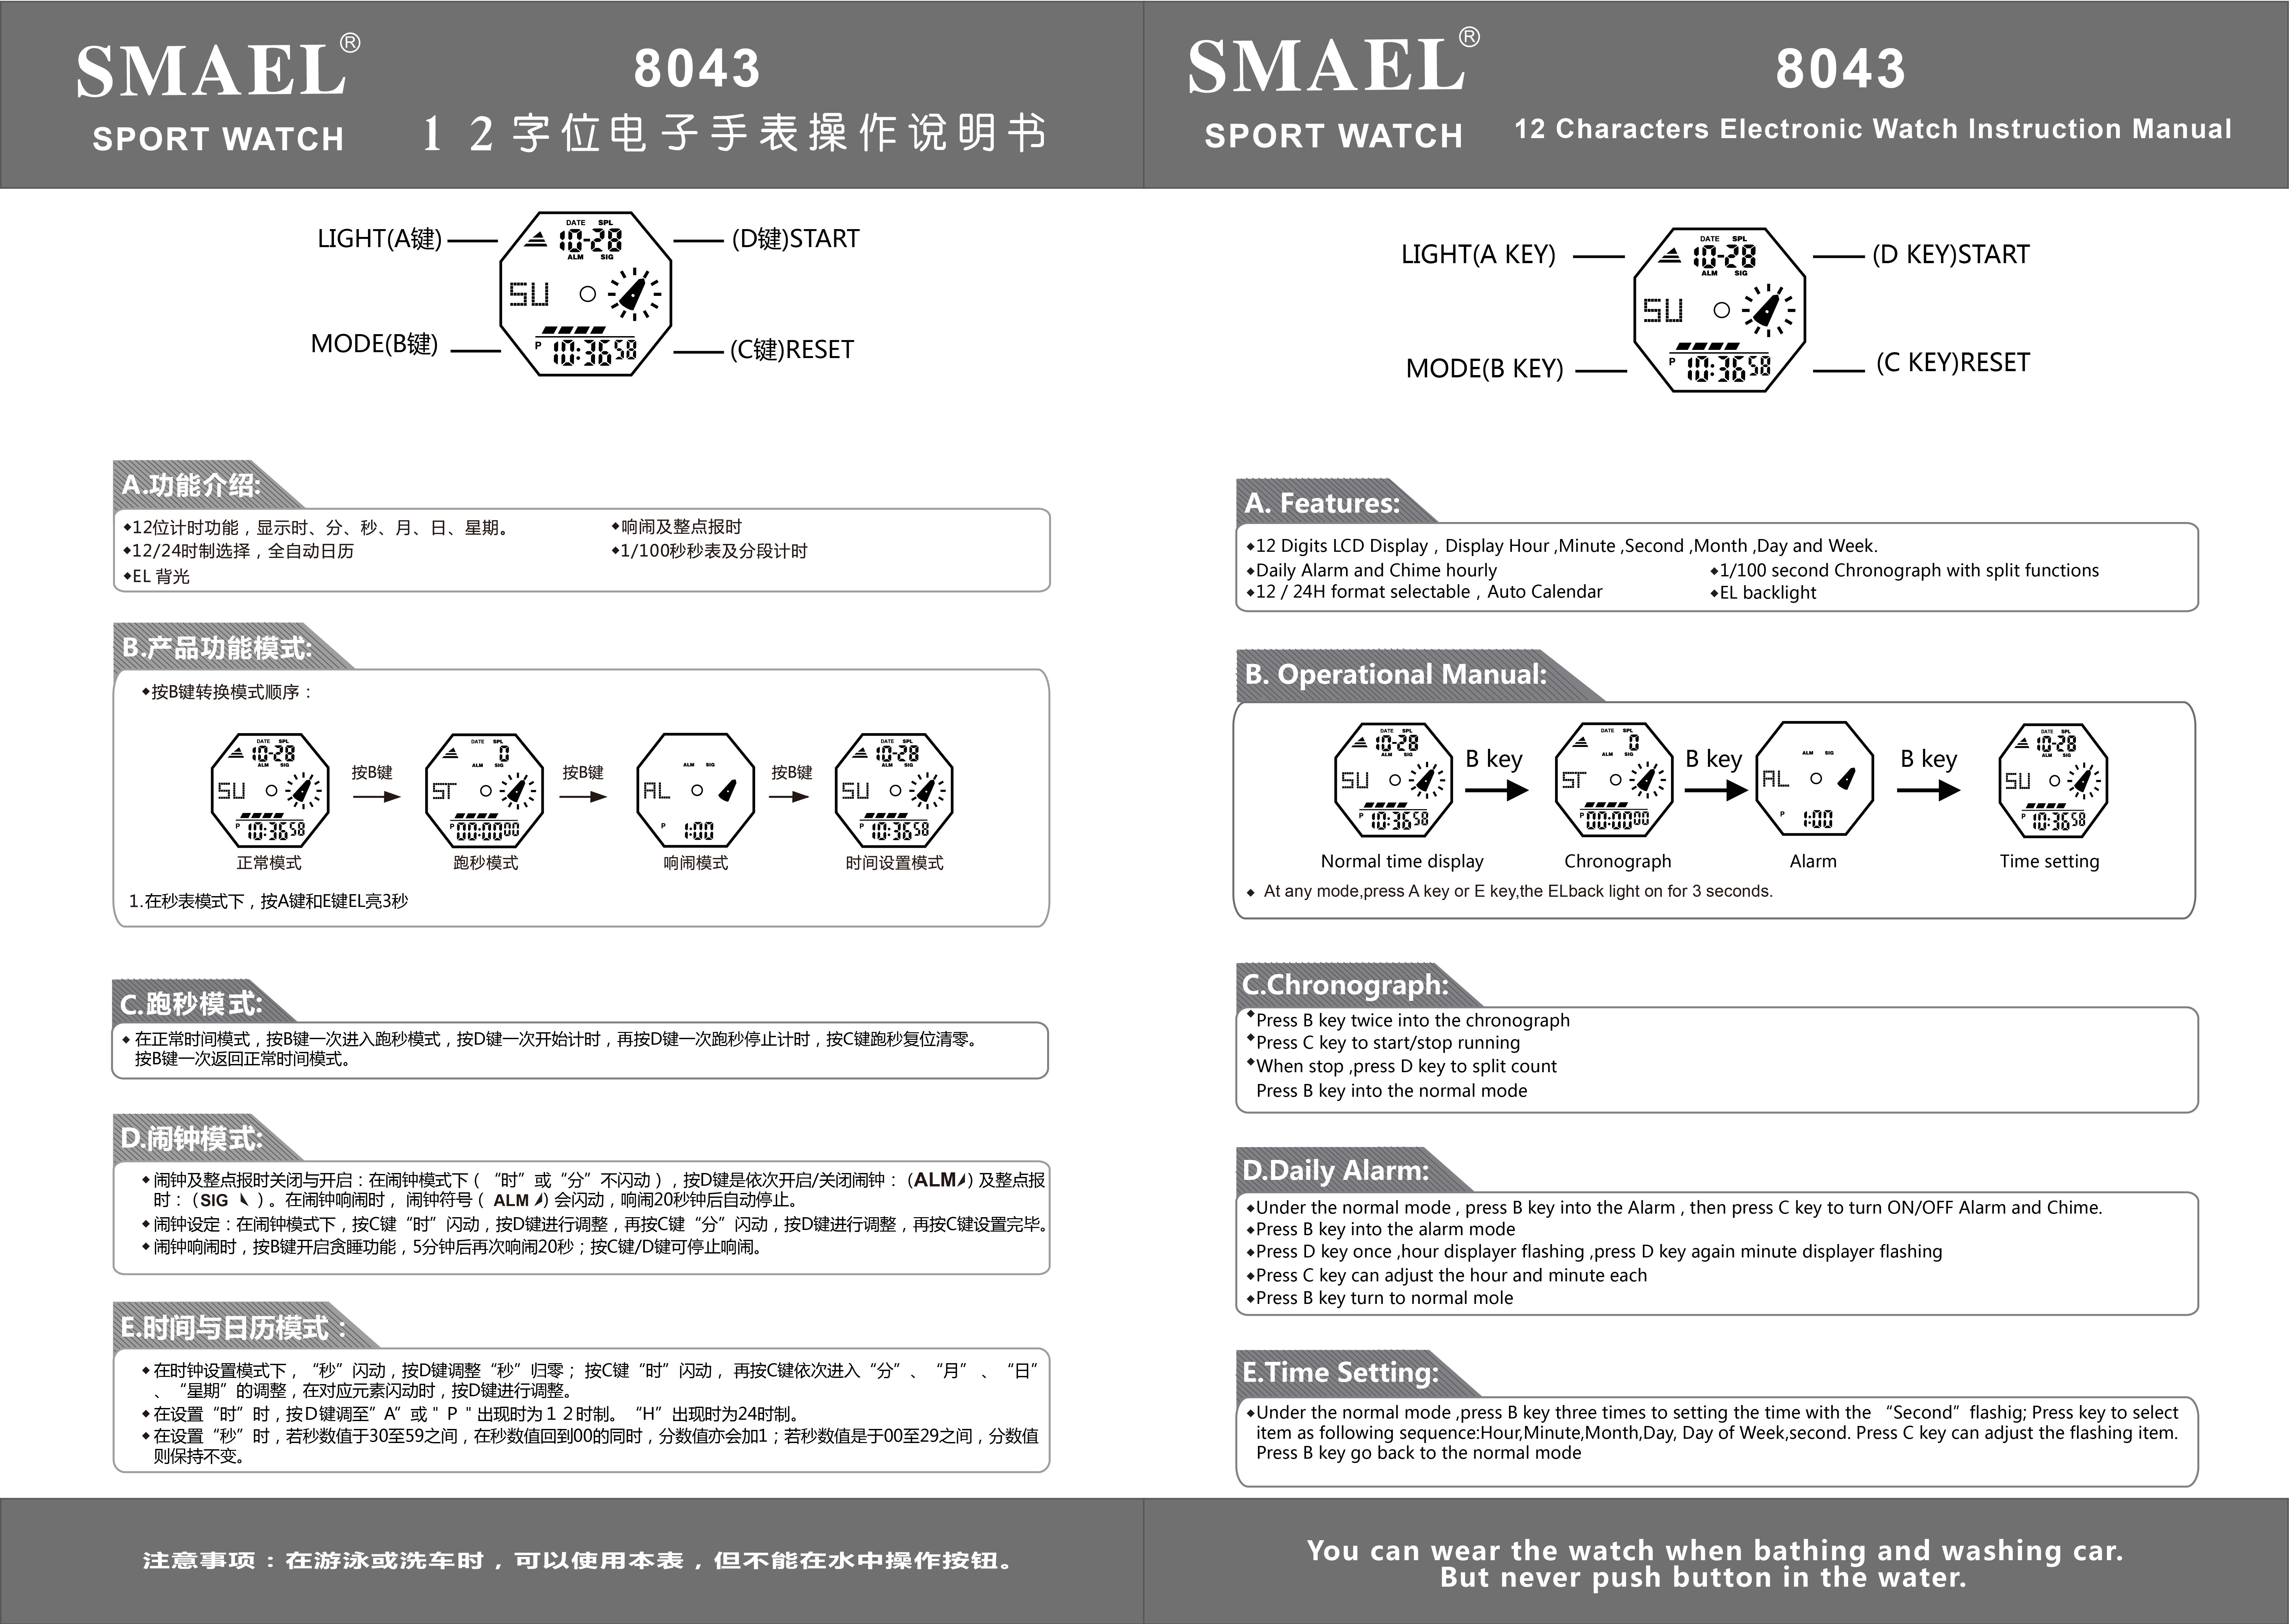 8043 instructions in English and Chinese 12